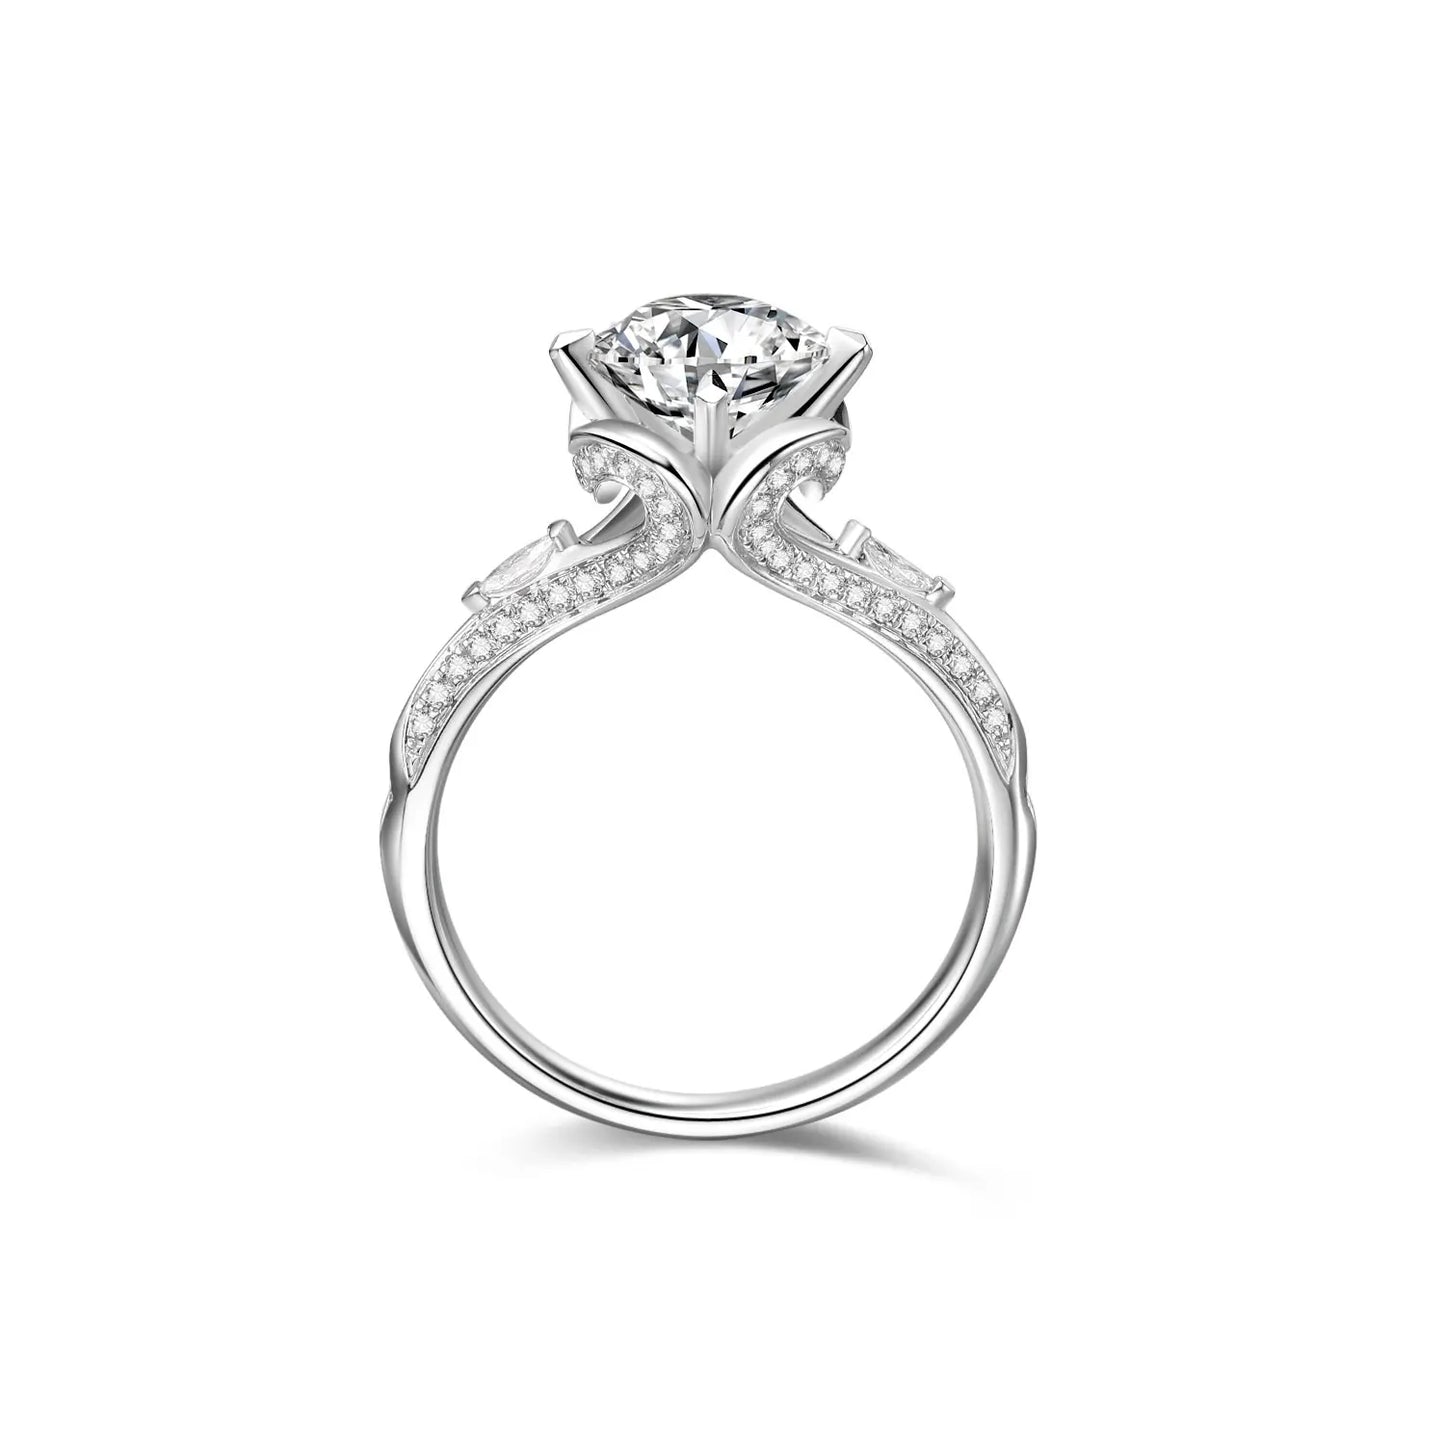 1.5-2ct Round Cut VVS1 Diamond Ring with in 18K Solid White Gold